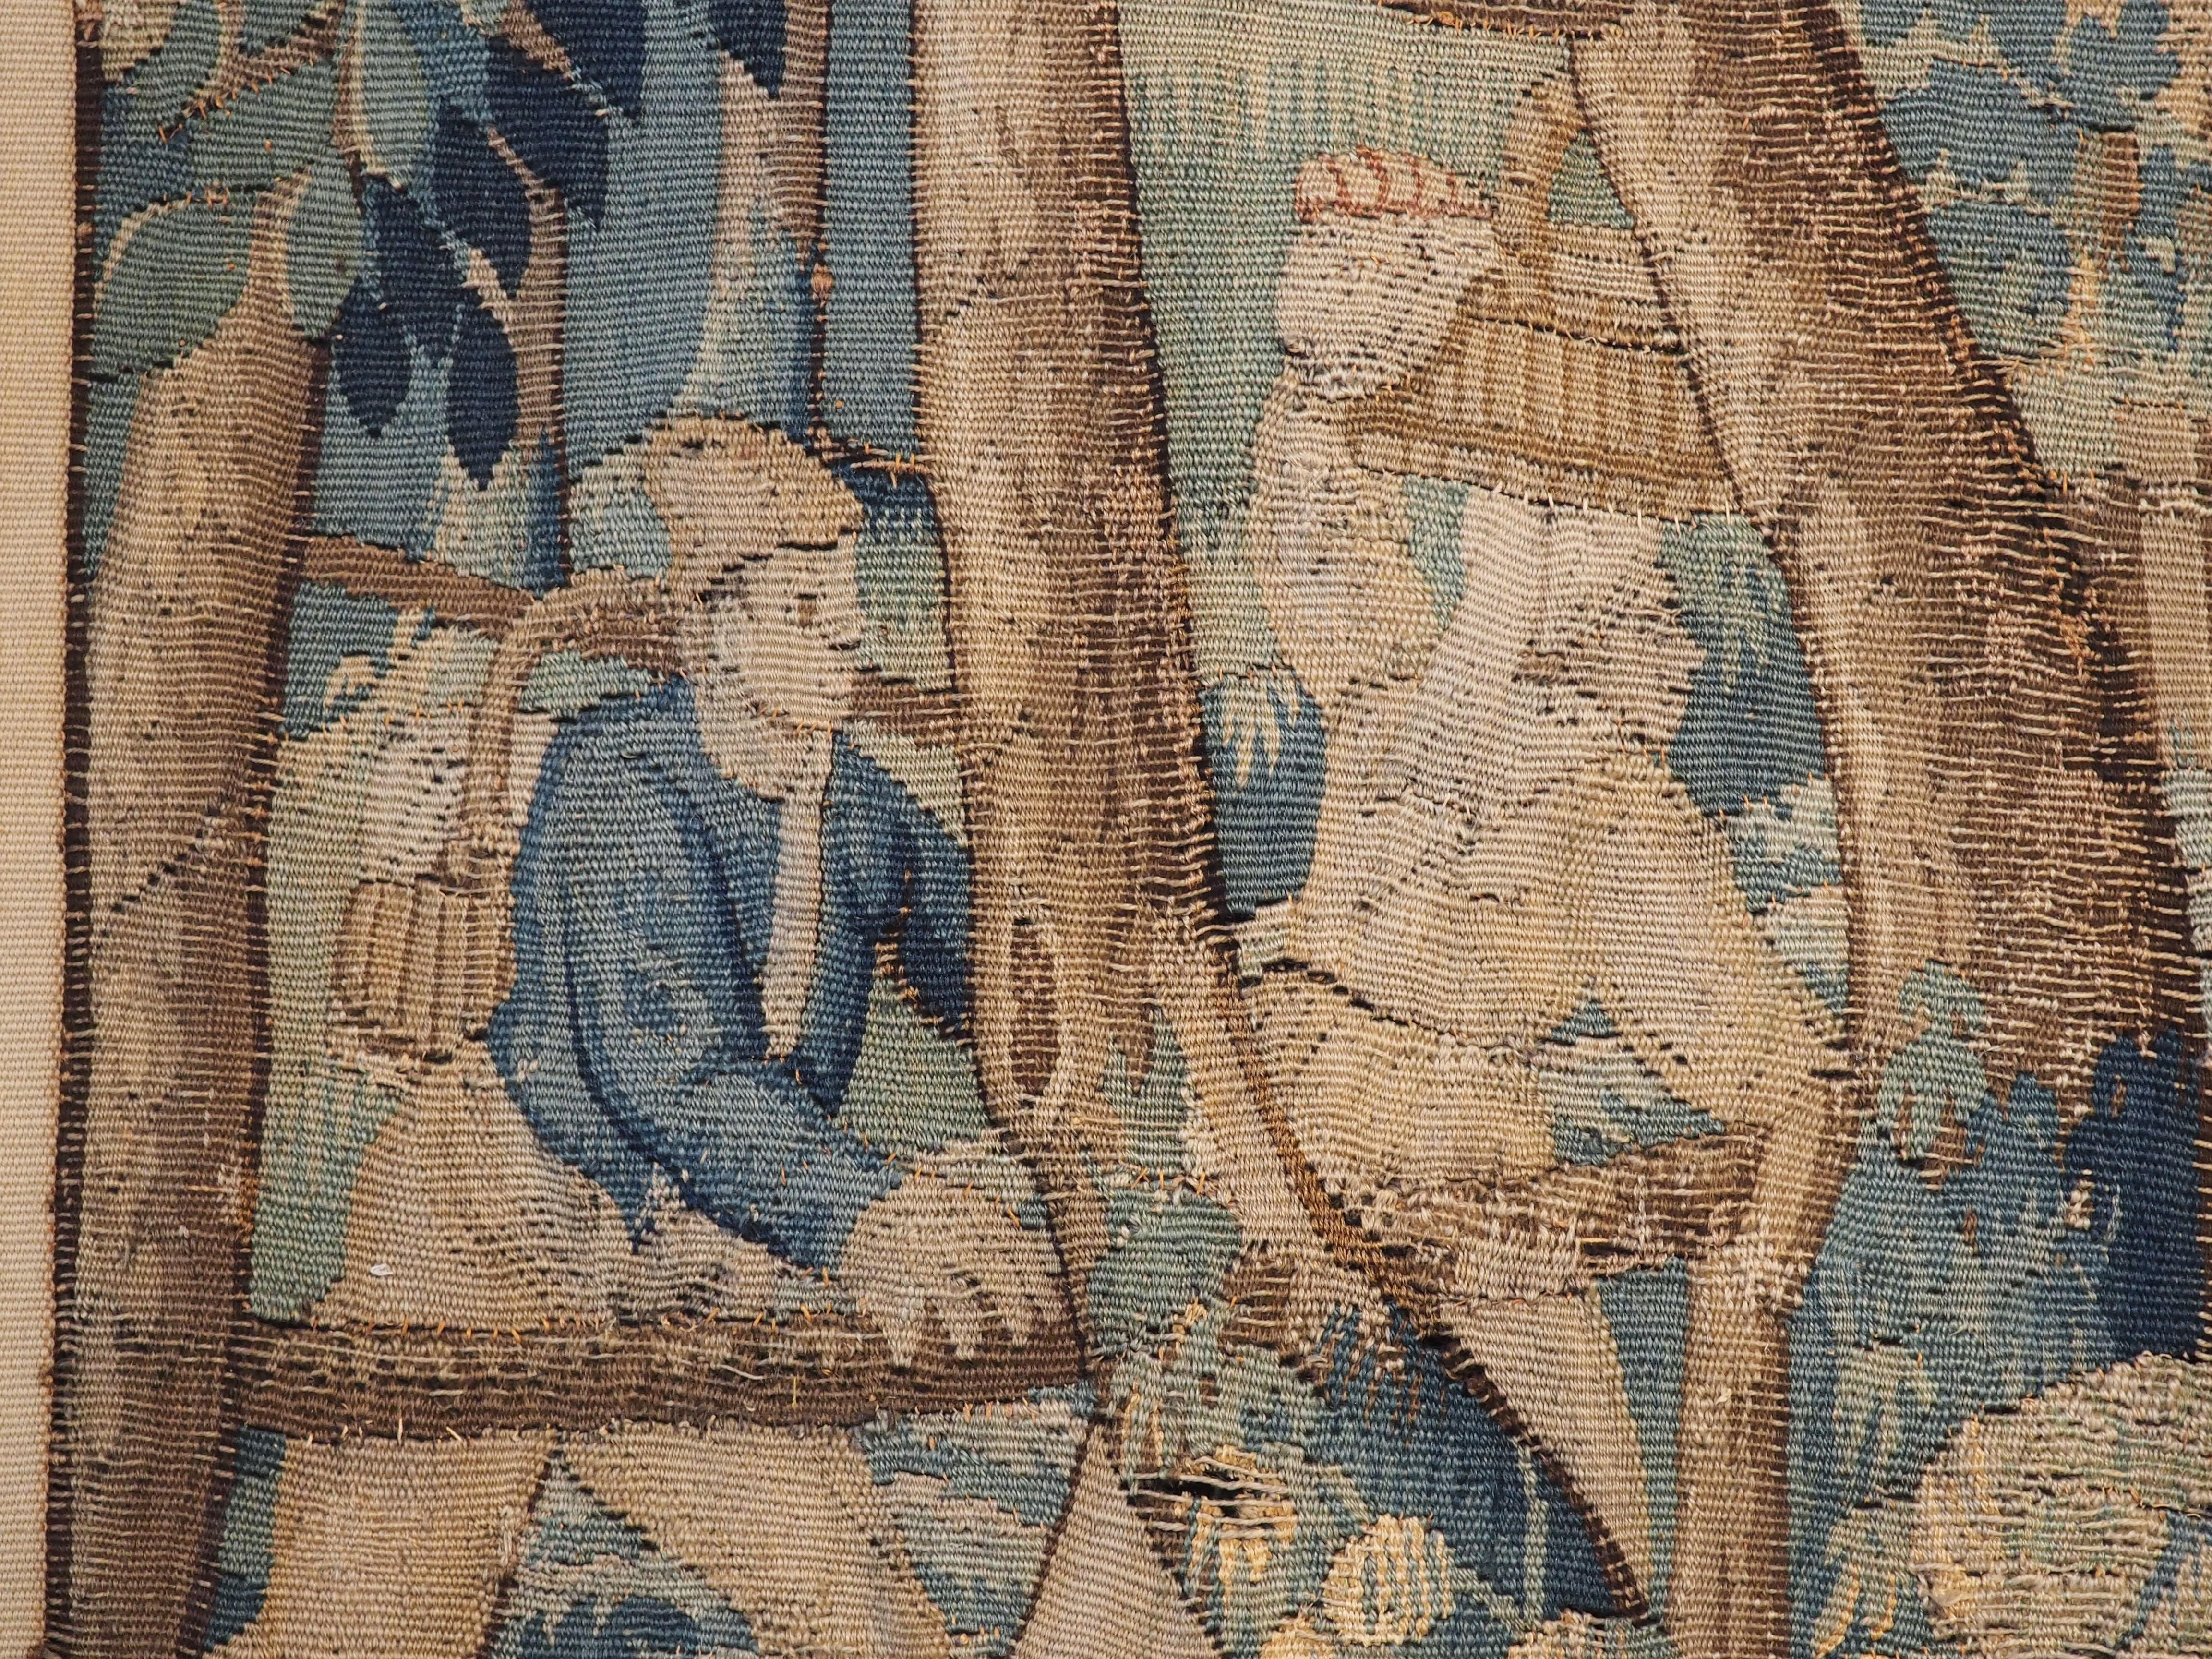 16th Century Verdure Landscape Tapestry from Flanders 5